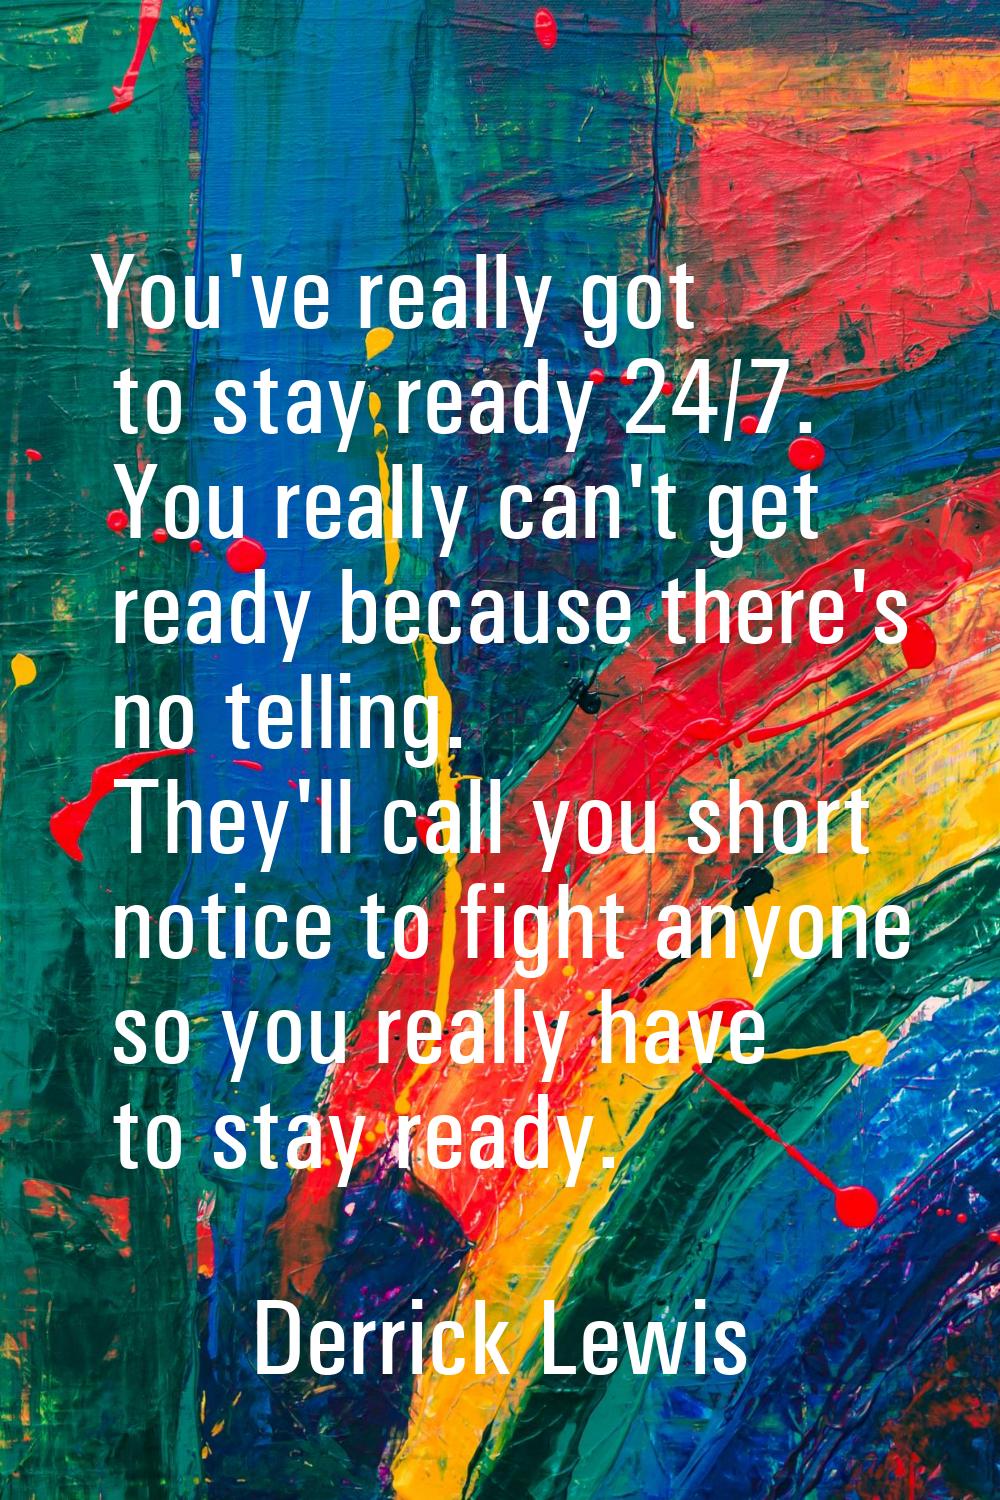 You've really got to stay ready 24/7. You really can't get ready because there's no telling. They'l